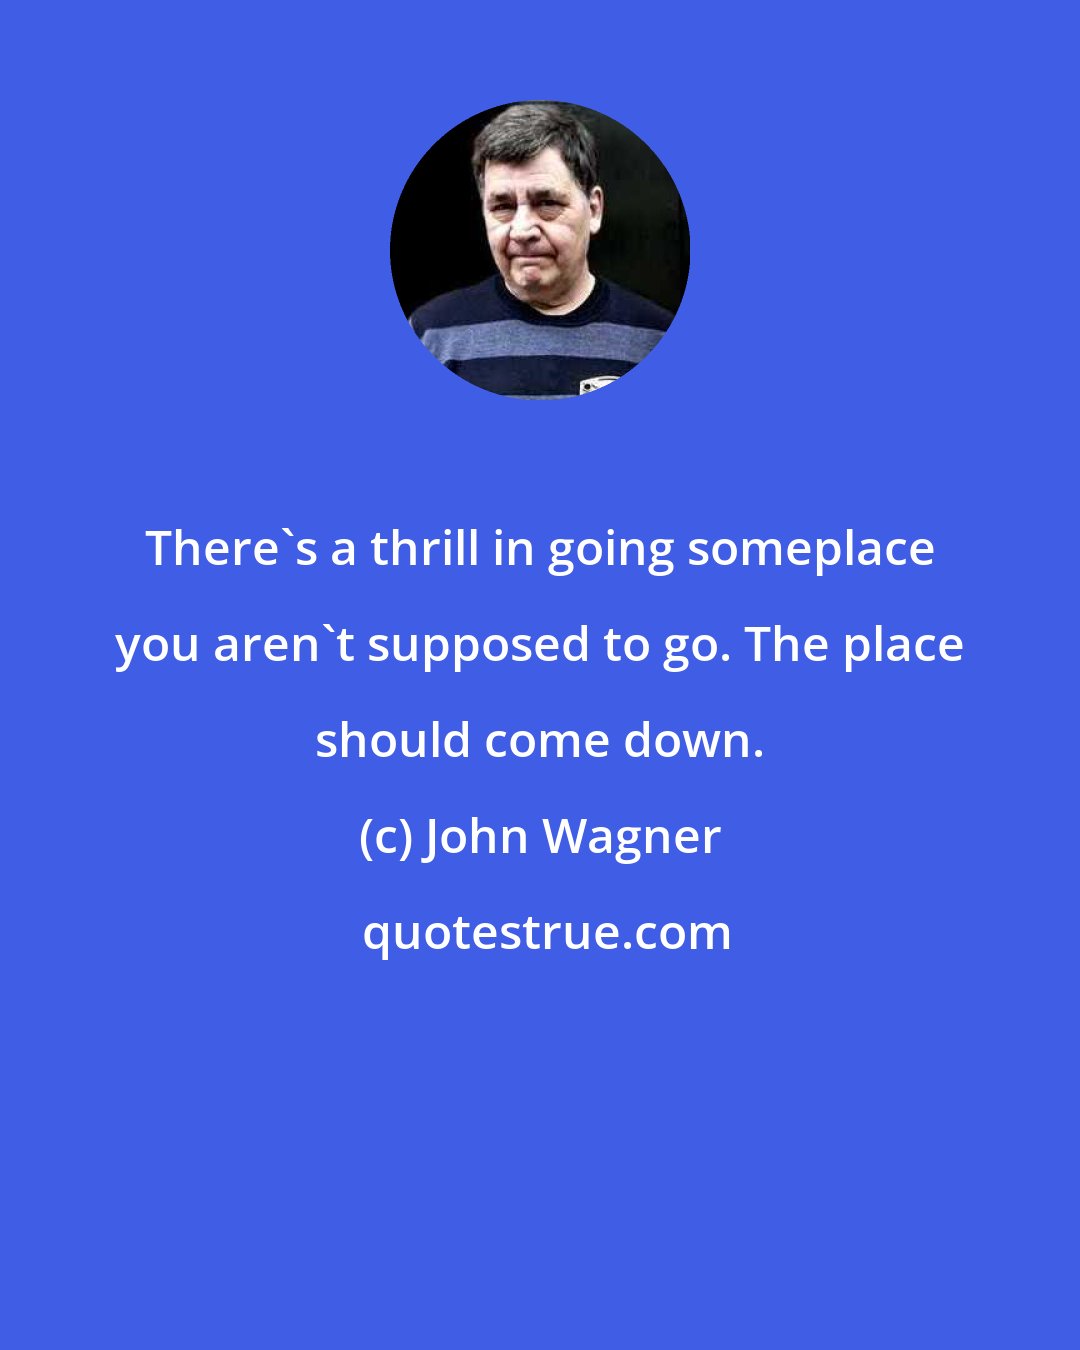 John Wagner: There's a thrill in going someplace you aren't supposed to go. The place should come down.